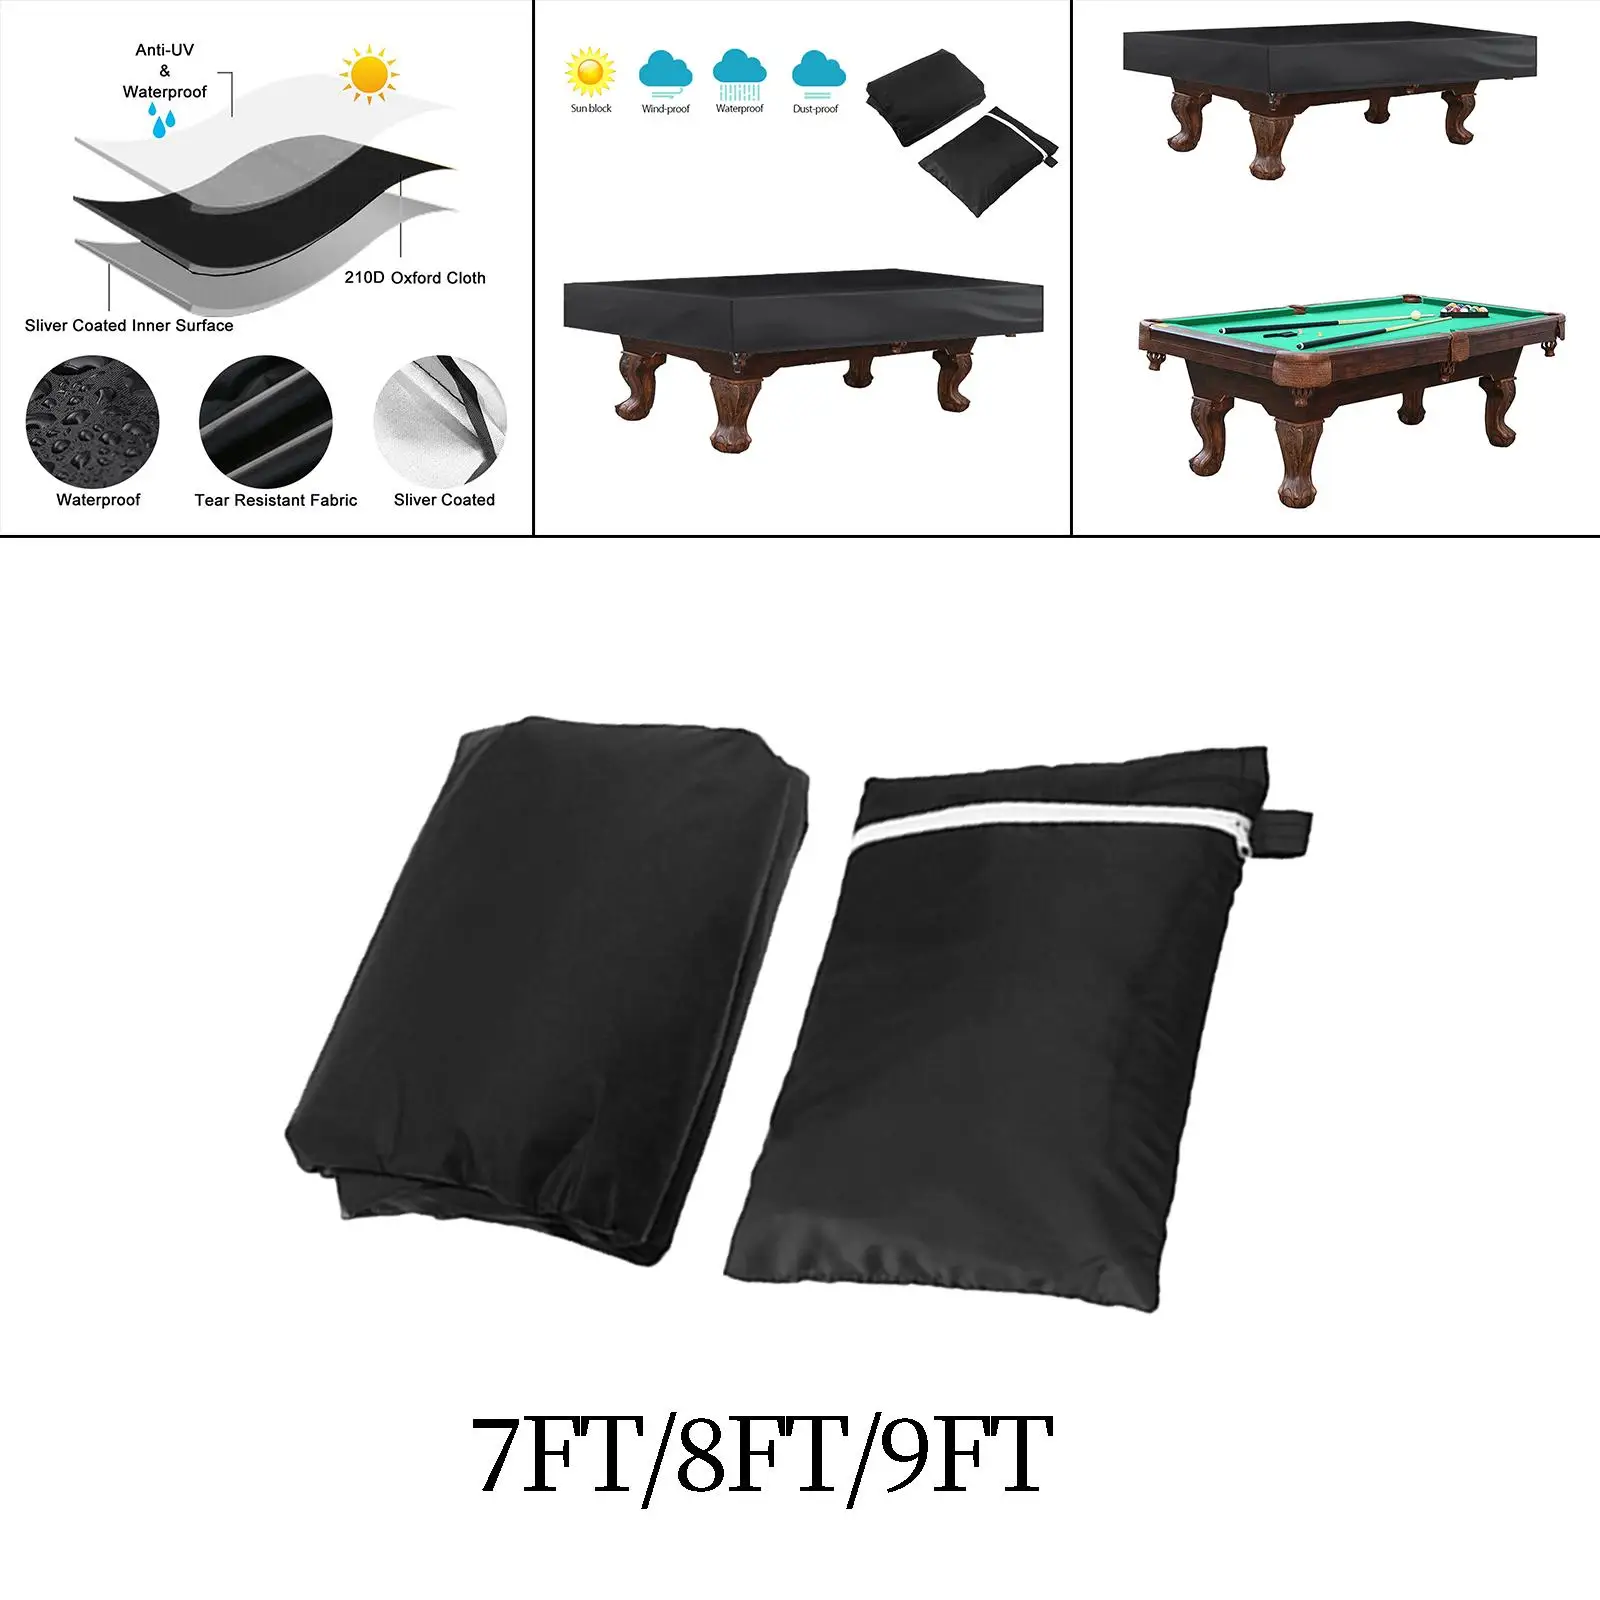 Billiard Pool Table Cover Waterproof Rain Resistant Sun Protection Snooker Table Cover for Indoor Outdoor Table Tennis Table